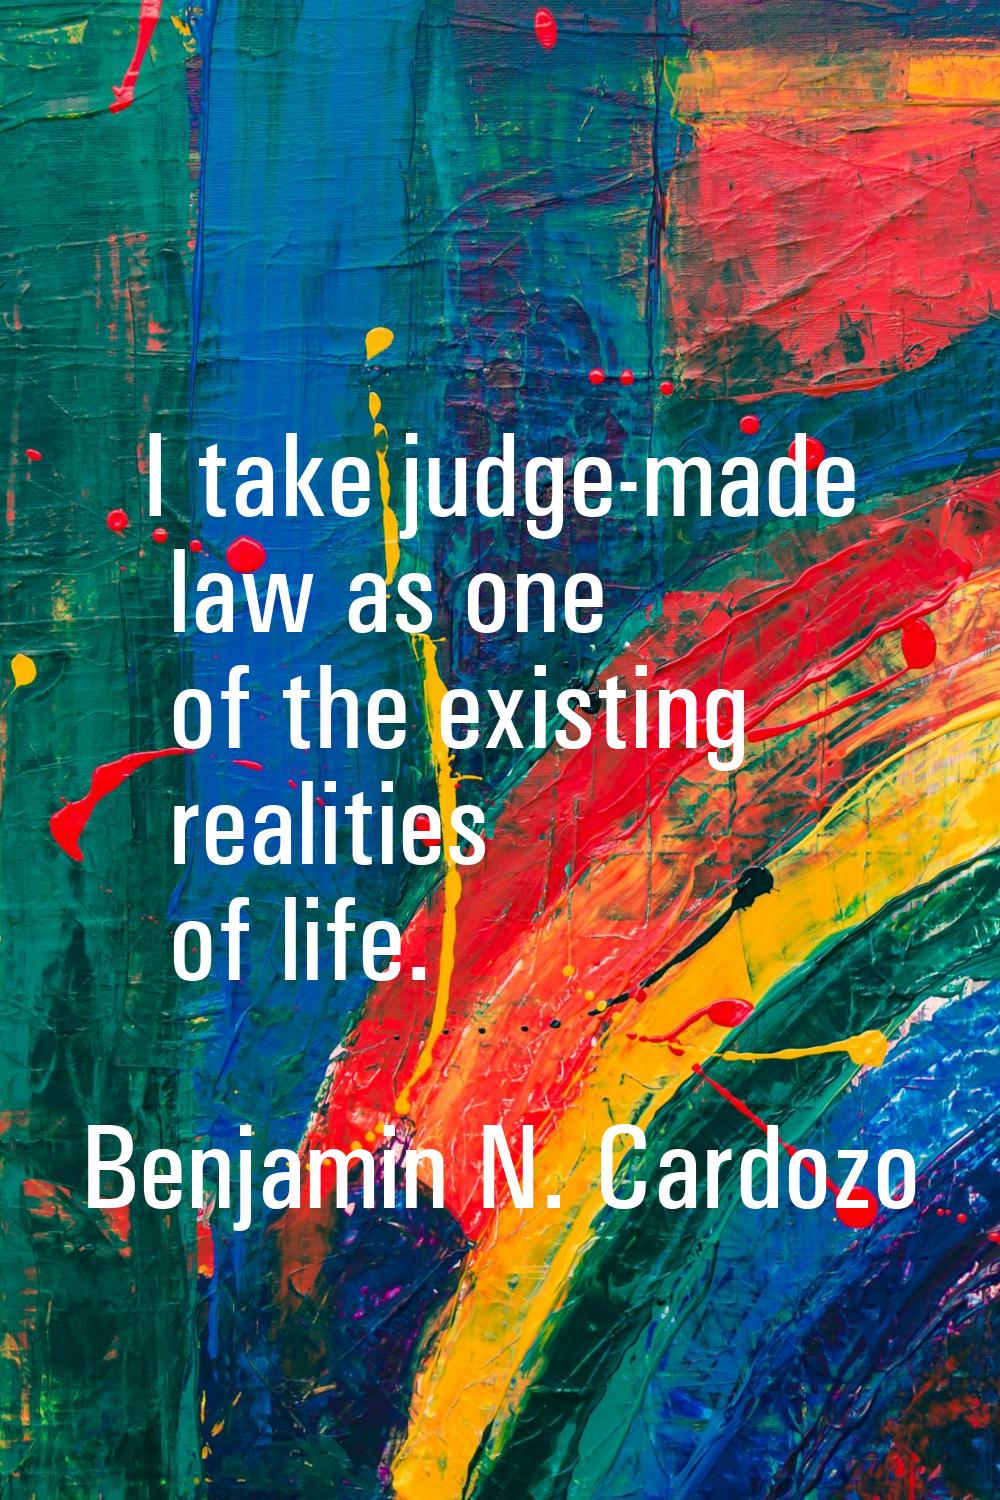 I take judge-made law as one of the existing realities of life.